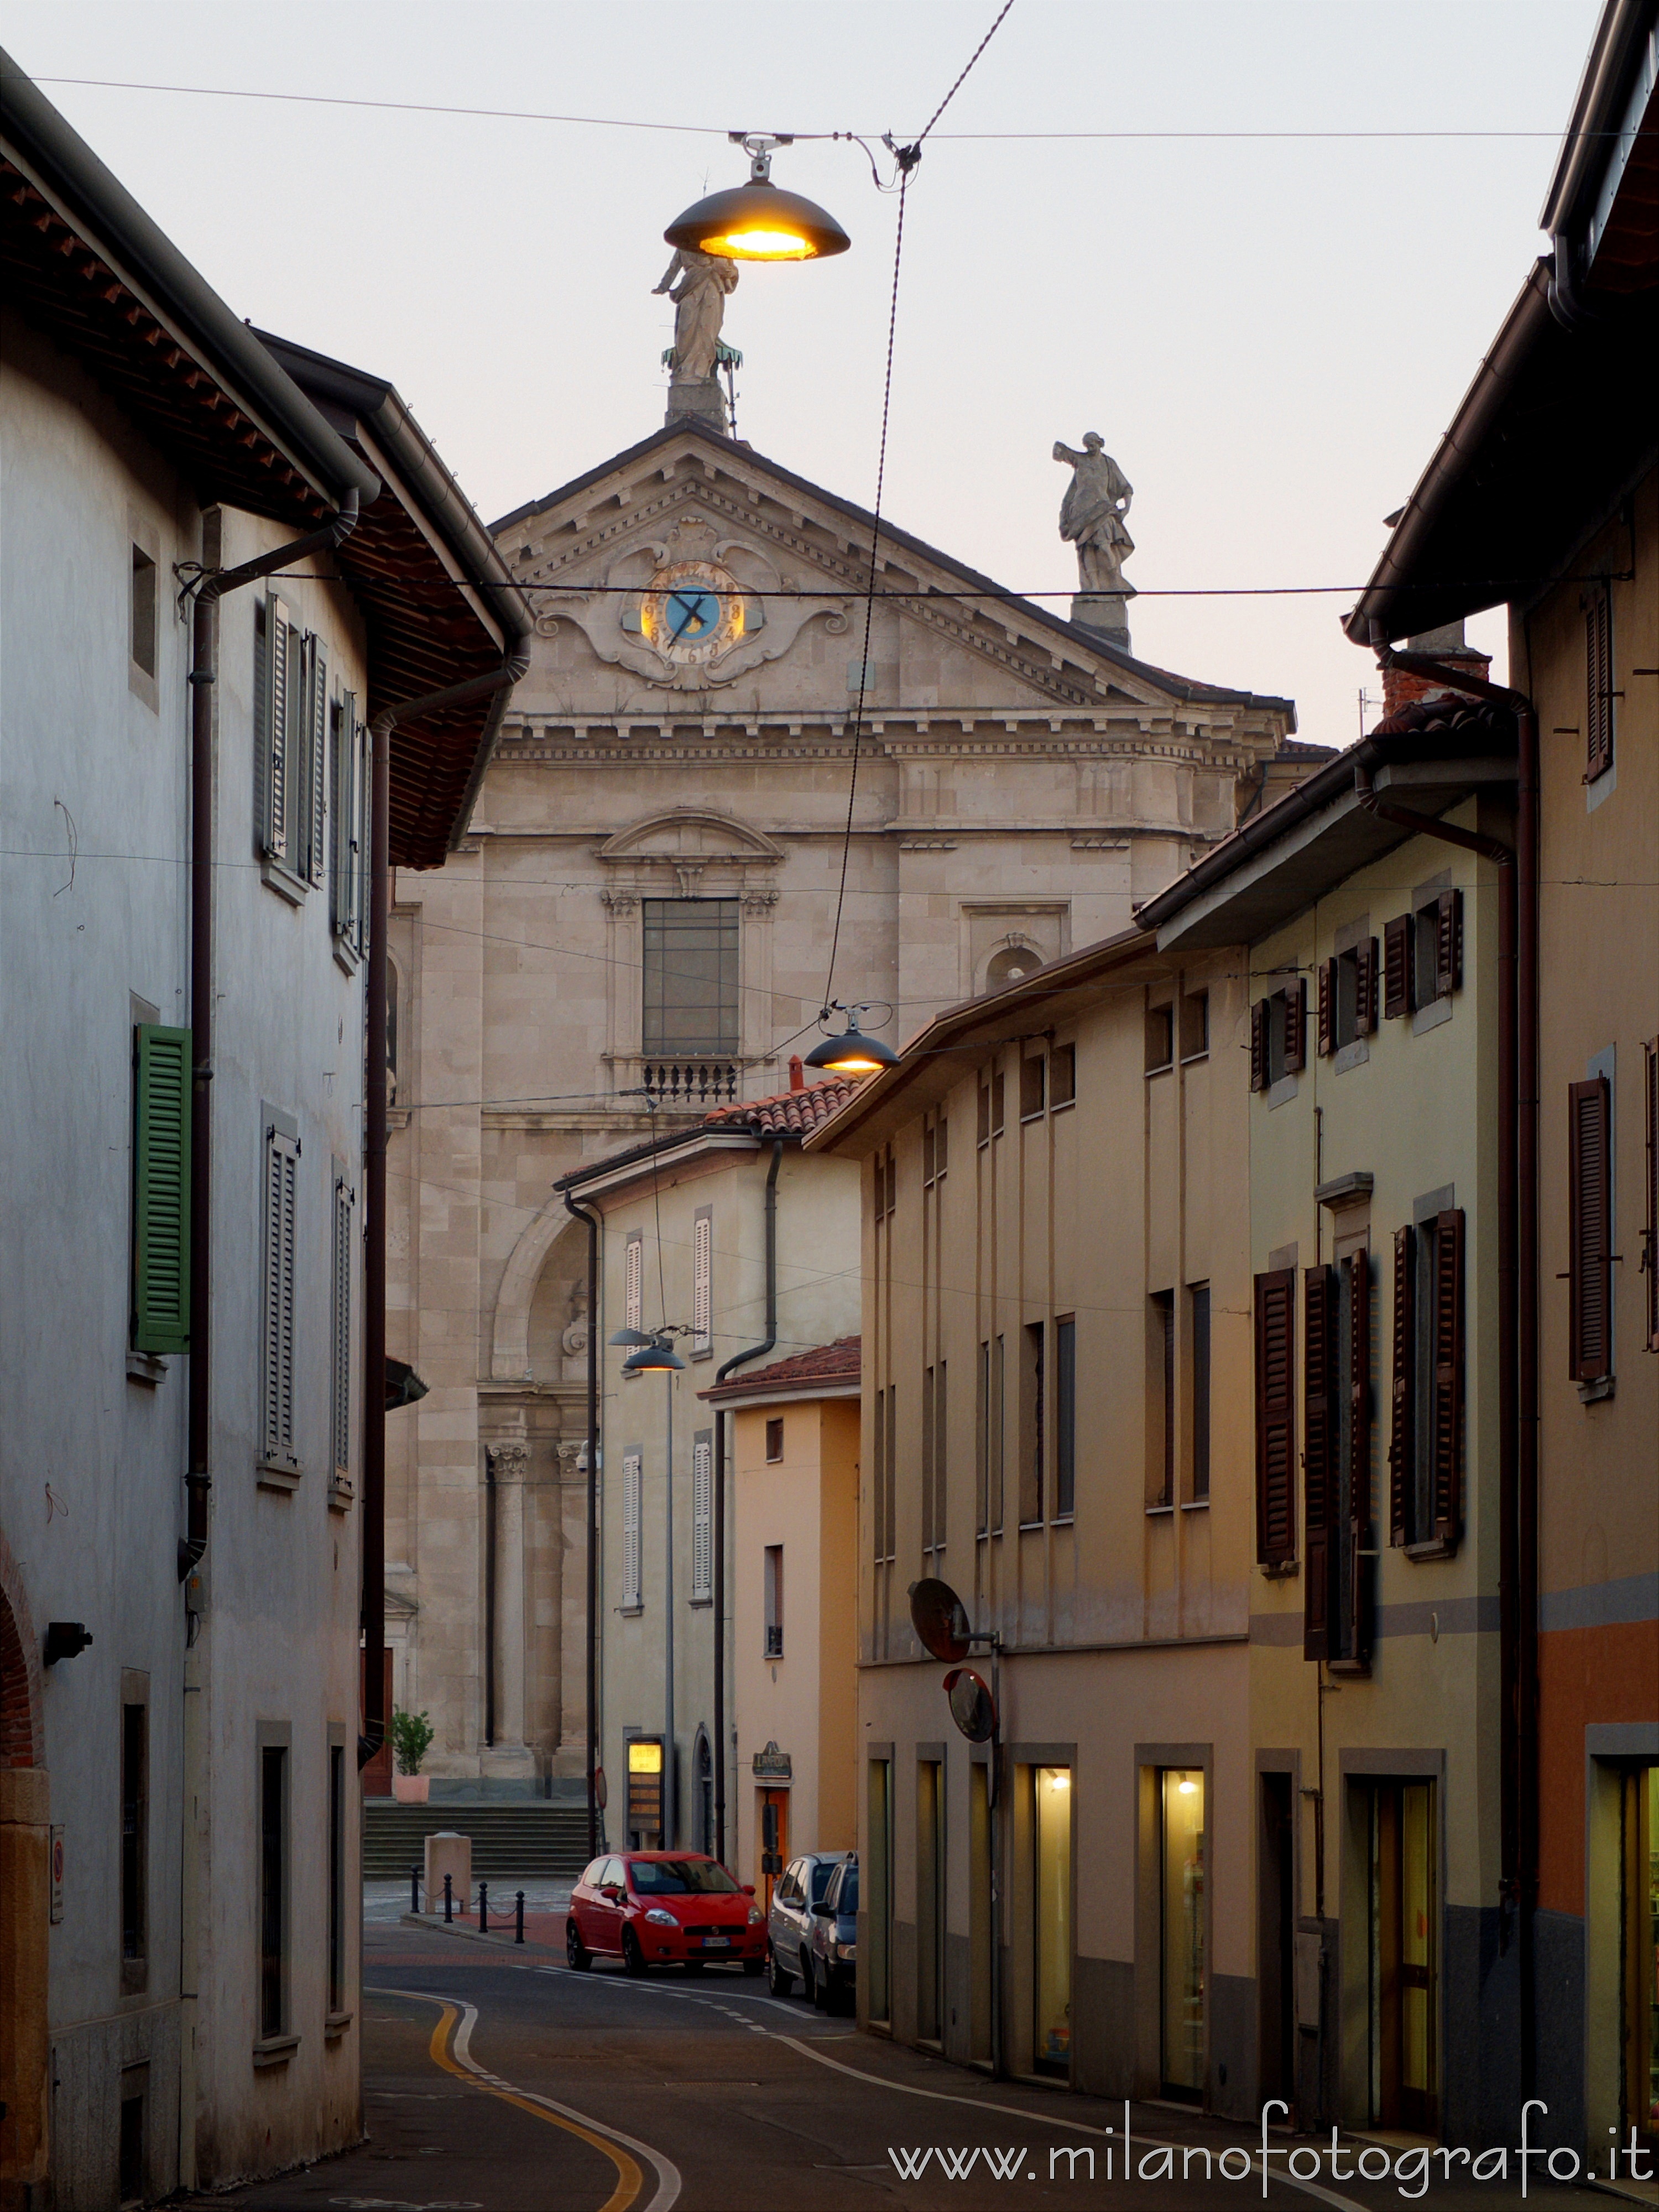 Urgnano (Bergamo, Italy): The Church of Saints Nazario and Celso at the end of the street at dusk - Urgnano (Bergamo, Italy)